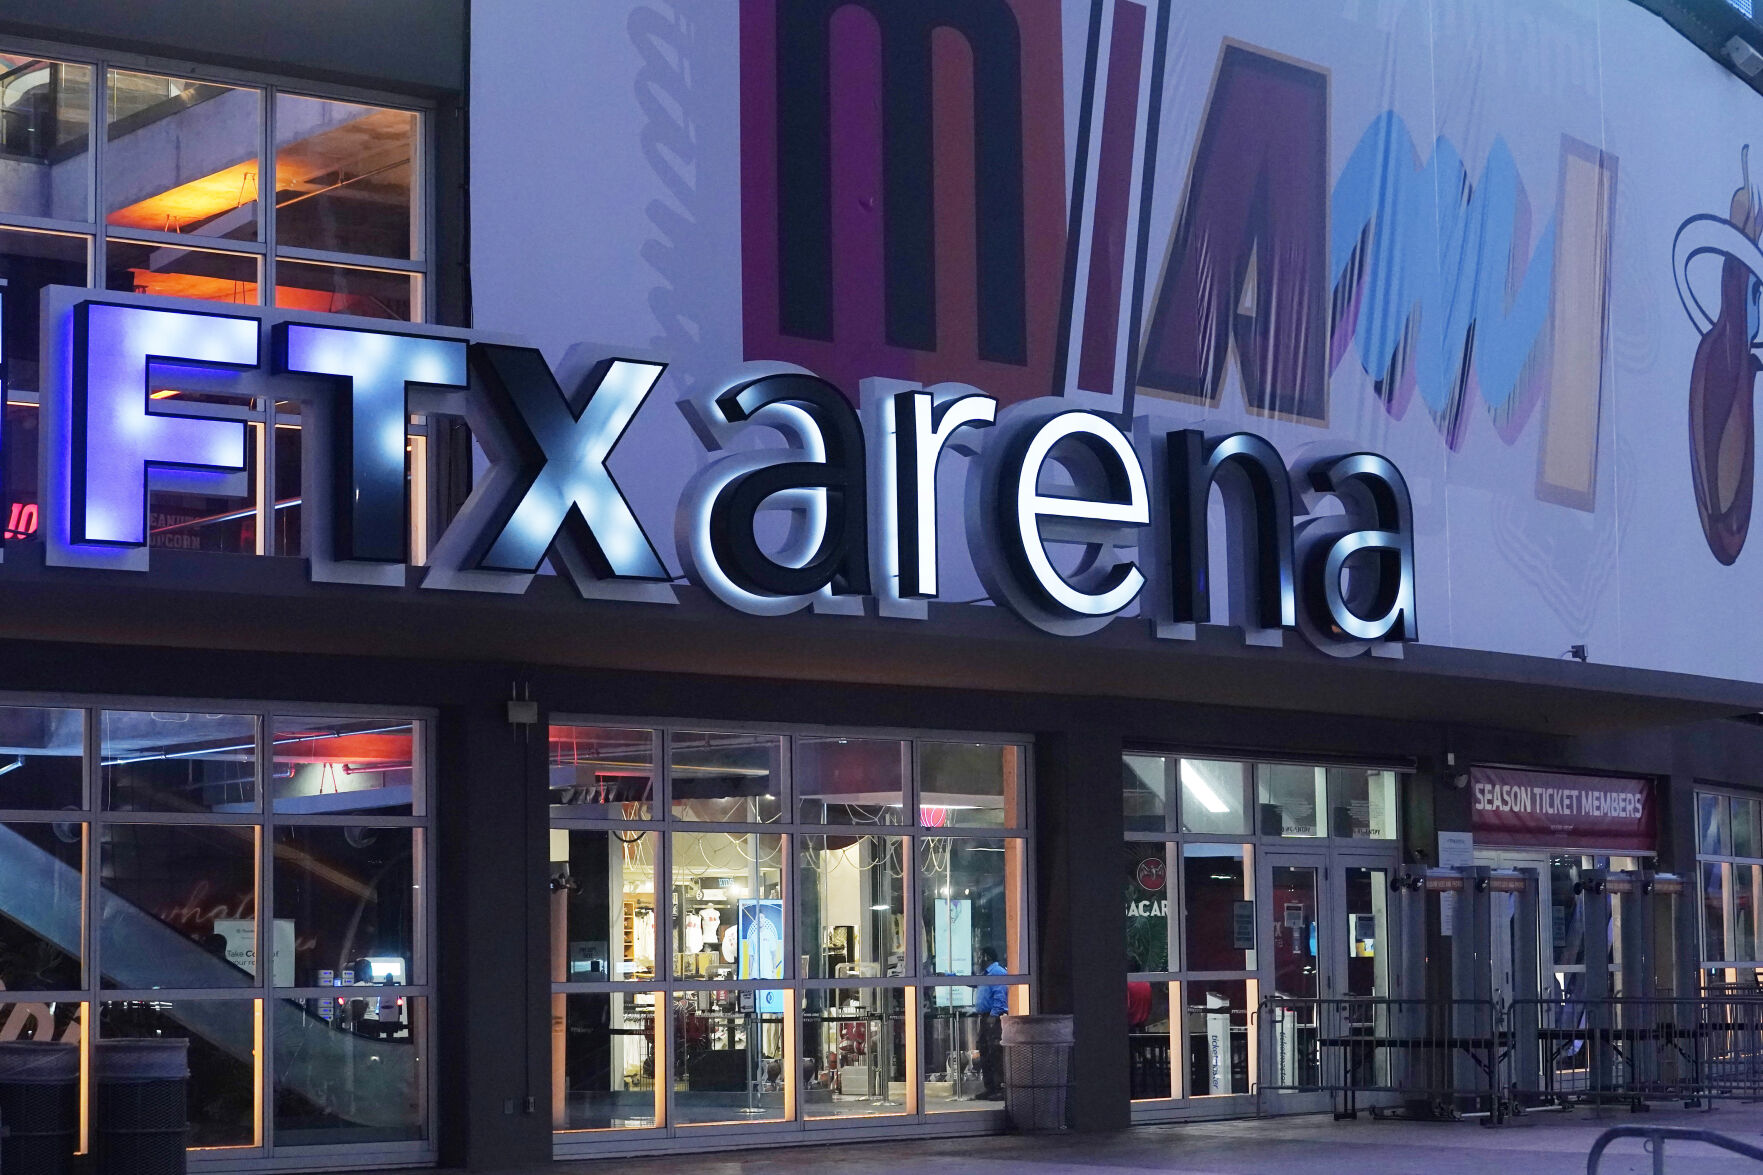 <p>FILE - A sign for the FTX Arena, where the Miami Heat basketball team plays, is illuminated on Nov. 12, 2022, in Miami. FTX filed for bankruptcy protection Friday, Nov. 11. (AP Photo/Marta Lavandier, File)</p>   PHOTO CREDIT: The Associated Press